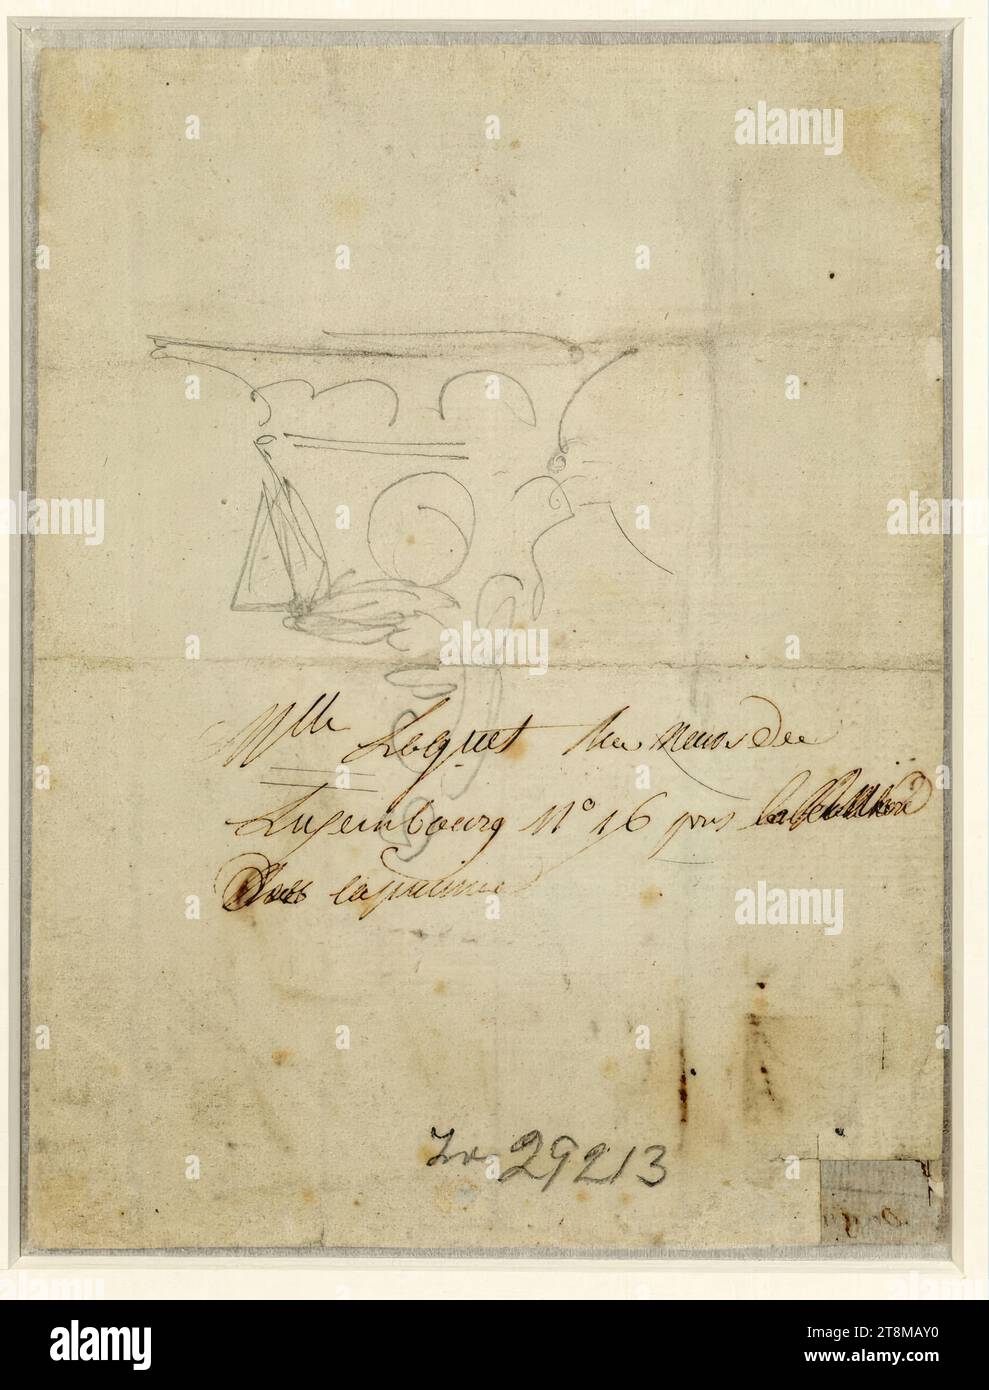 Indistinct pencil sketch, Martin Drolling (Oberbergheim 1752 - 1817 Paris), around 1810, drawing, pencil, 191 x 145 mm, M. handwritten inscription with pen in brown: 'Mlle Leguet rue neuve du, Luxembourg No 16 pres le boulevard, des capucines'; mu 'Inv 29213', pencil; Recto: on an inserted, reinforced piece of paper (2 x 3 cm) by another hand with brush in brown 'Daguerre Stock Photo